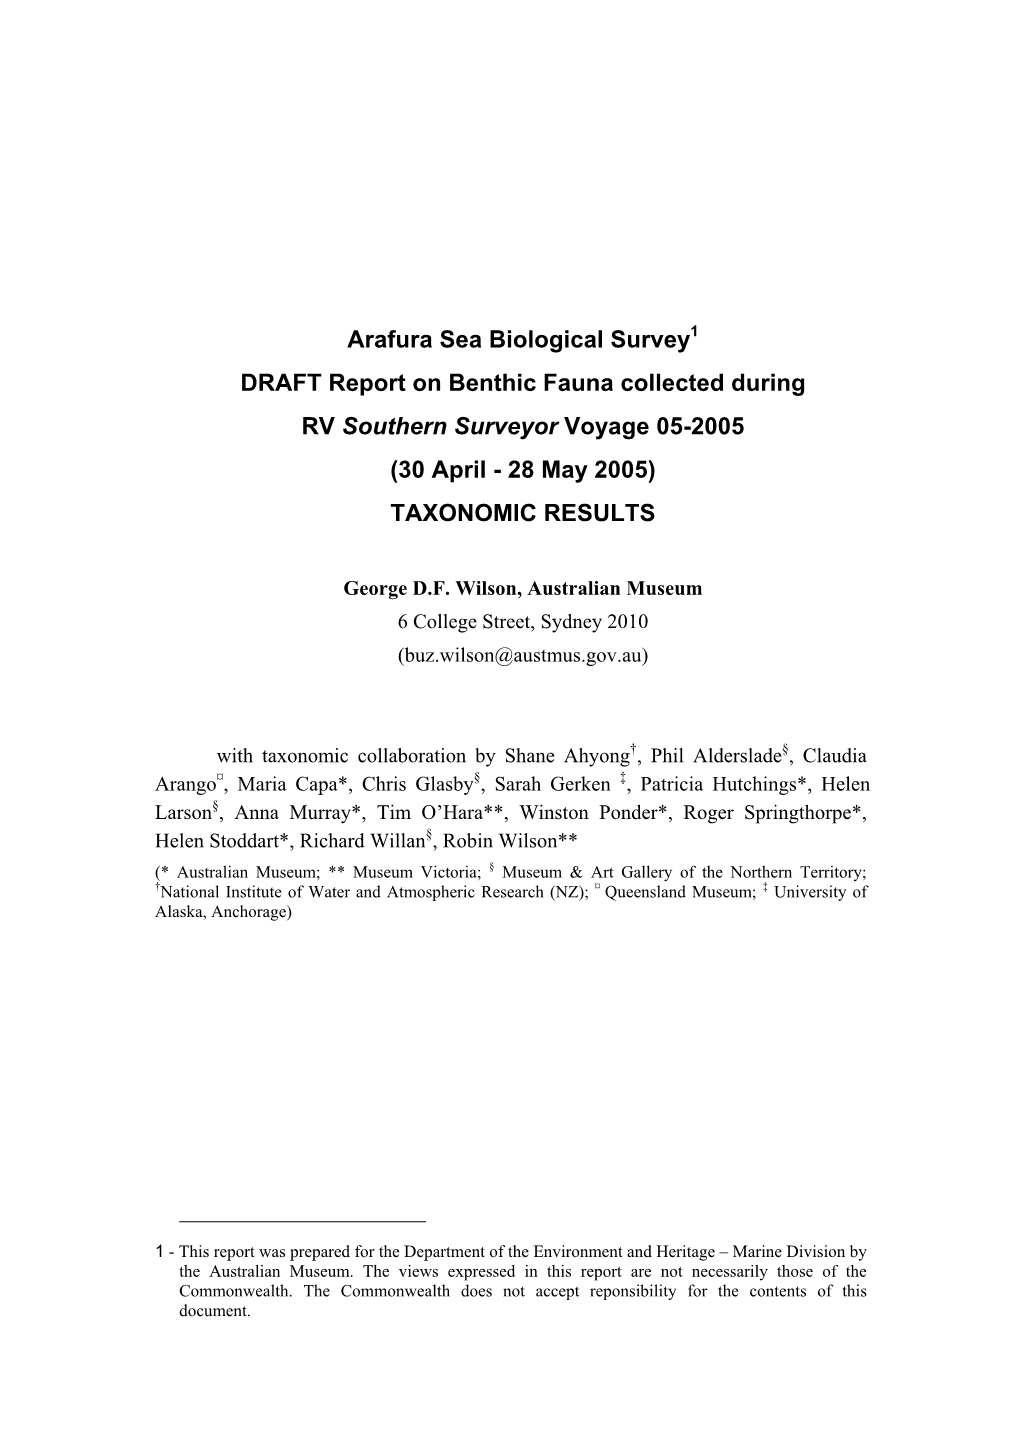 Arafura Sea Biological Survey1 DRAFT Report on Benthic Fauna Collected During RV Southern Surveyor Voyage 05-2005 (30 April - 28 May 2005) TAXONOMIC RESULTS